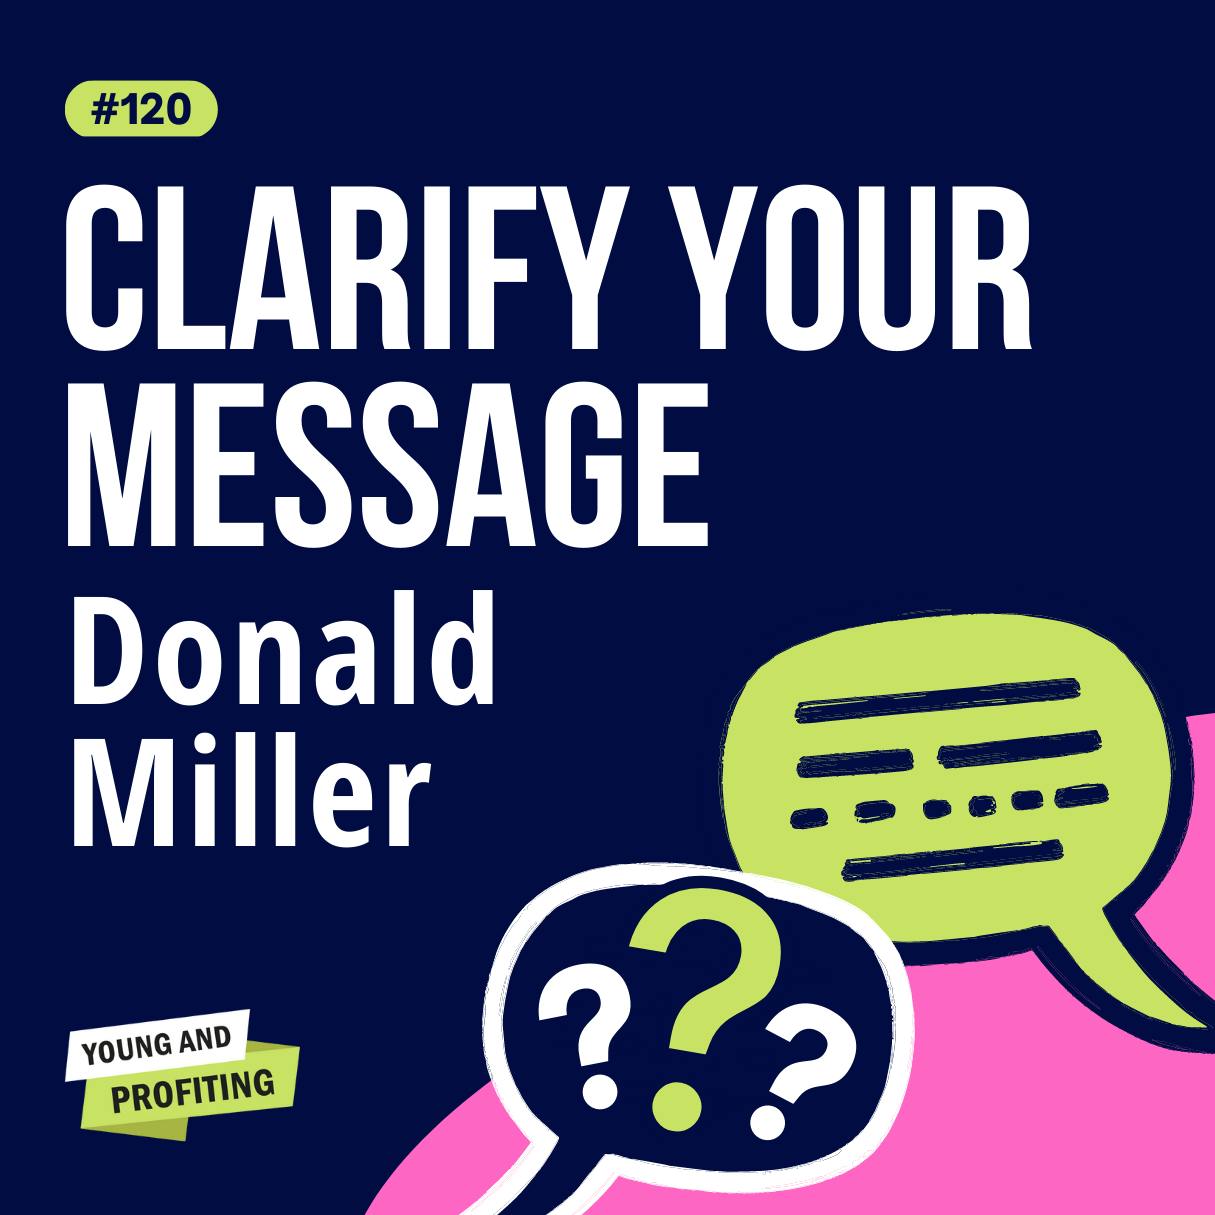 YAPClassic: Donald Miller on Storytelling for Business, How to Clarify Your Message So Customers Engage